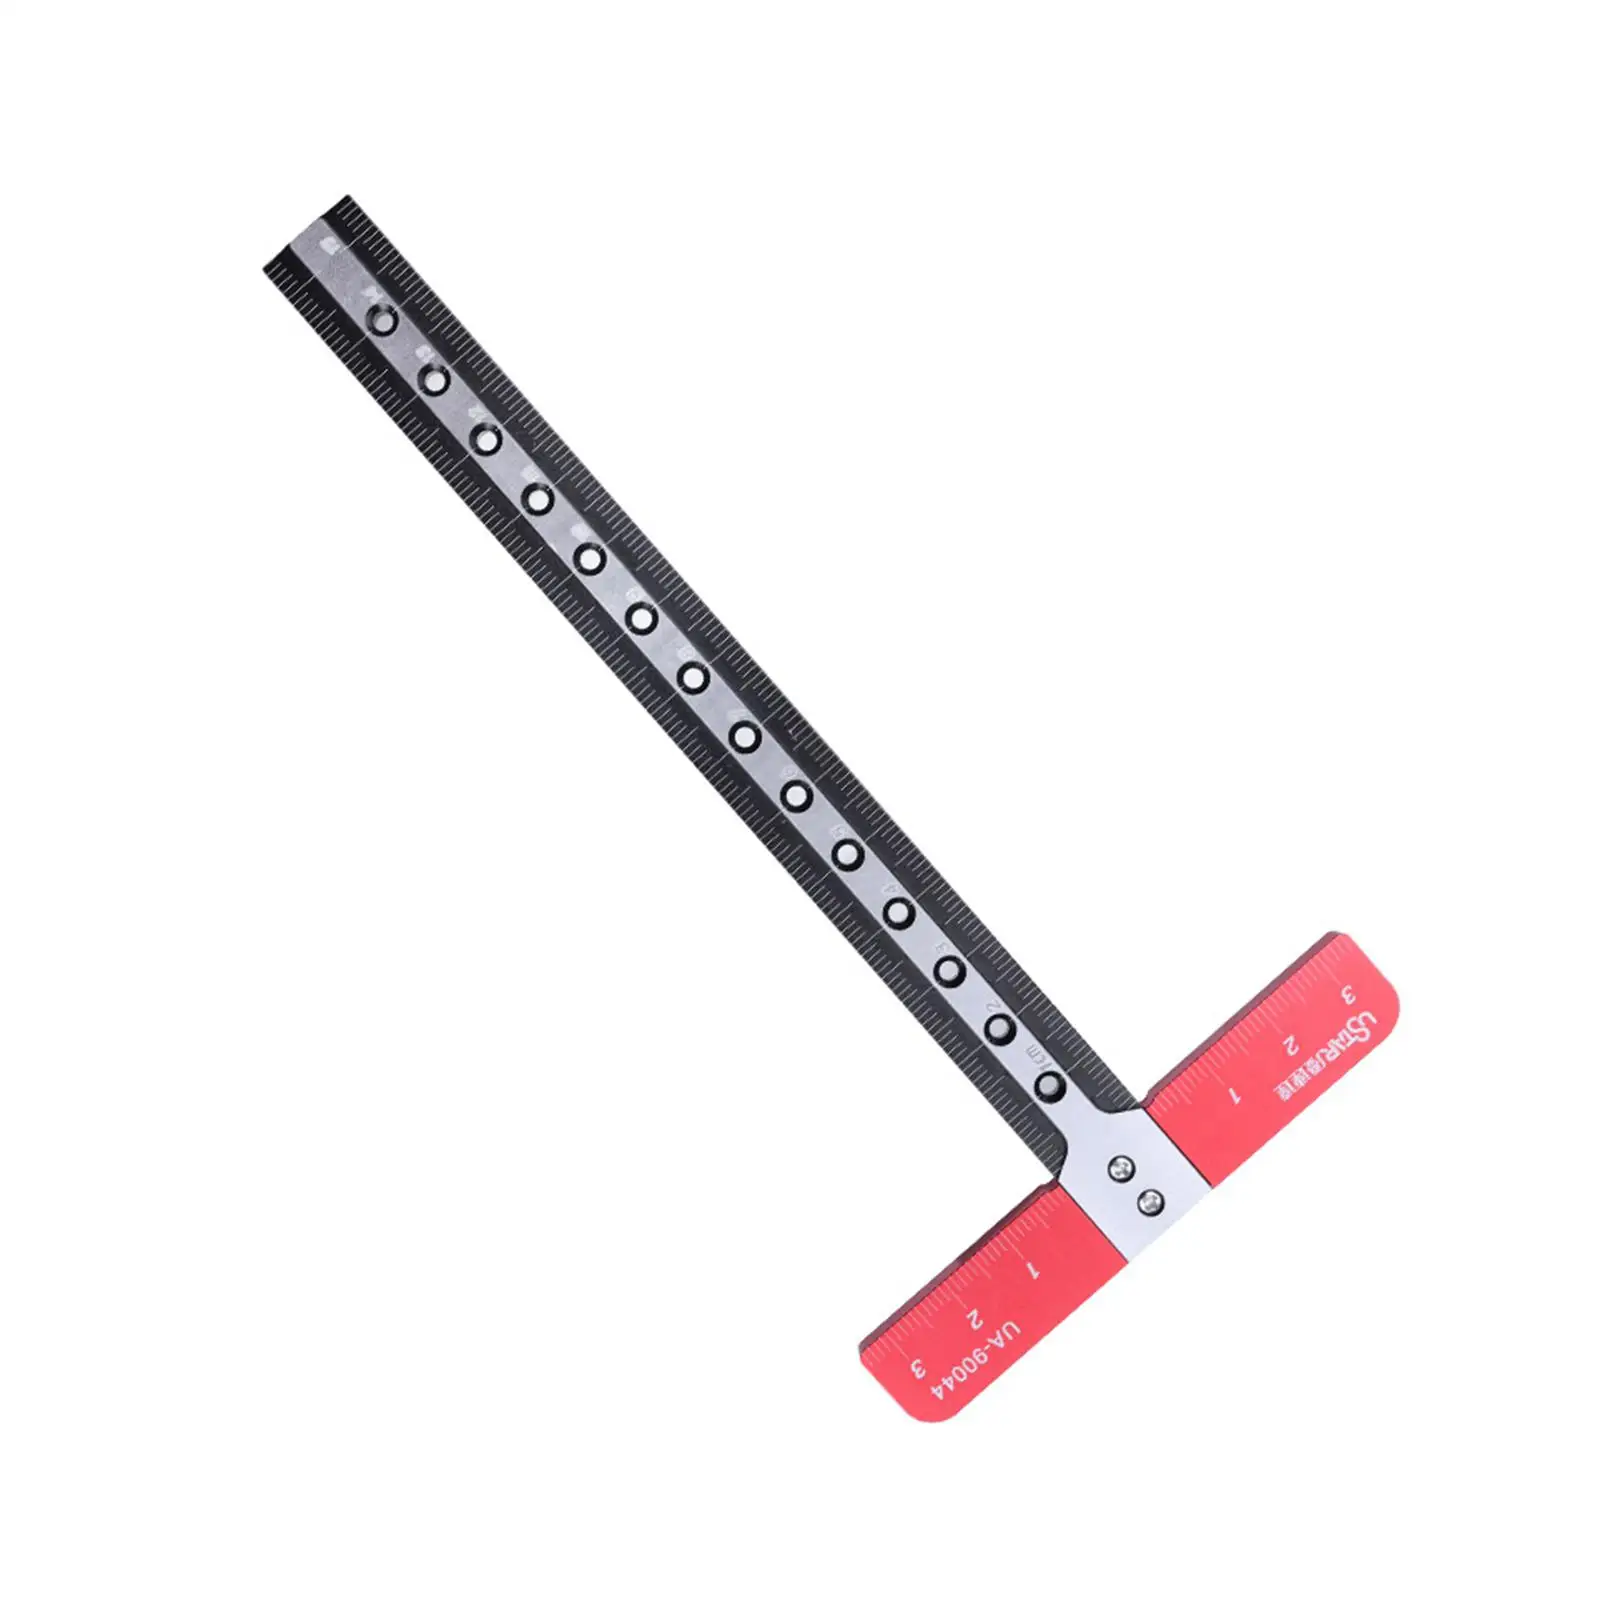 T Square Ruler Precise Angle Measure Tools Shape Positioning Ruler -90044 for Art Framing Drafting Tools Hobby DIY 170Mmx85mm